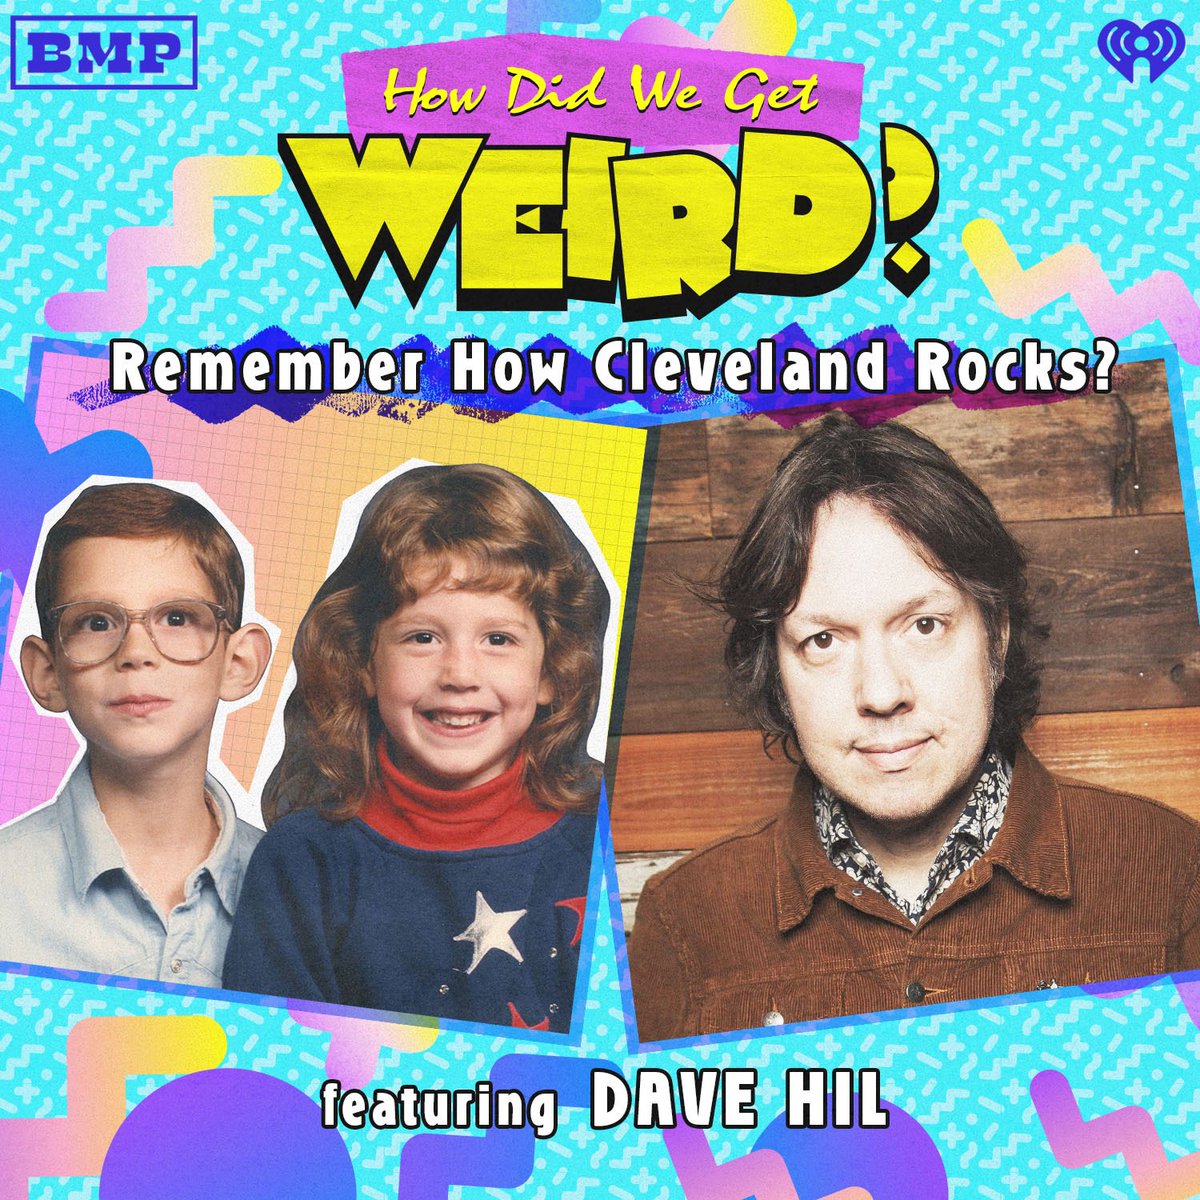 On today’s new ep, @jonahmbayer and I are thrilled to welcome the hilarious and delightful @mrdavehill !! We’re talking growing up in Cleveland, the Guns ‘N Roses show they both saw at very different stages of their youth (one didn’t go with their mom), mustaches and more!!!